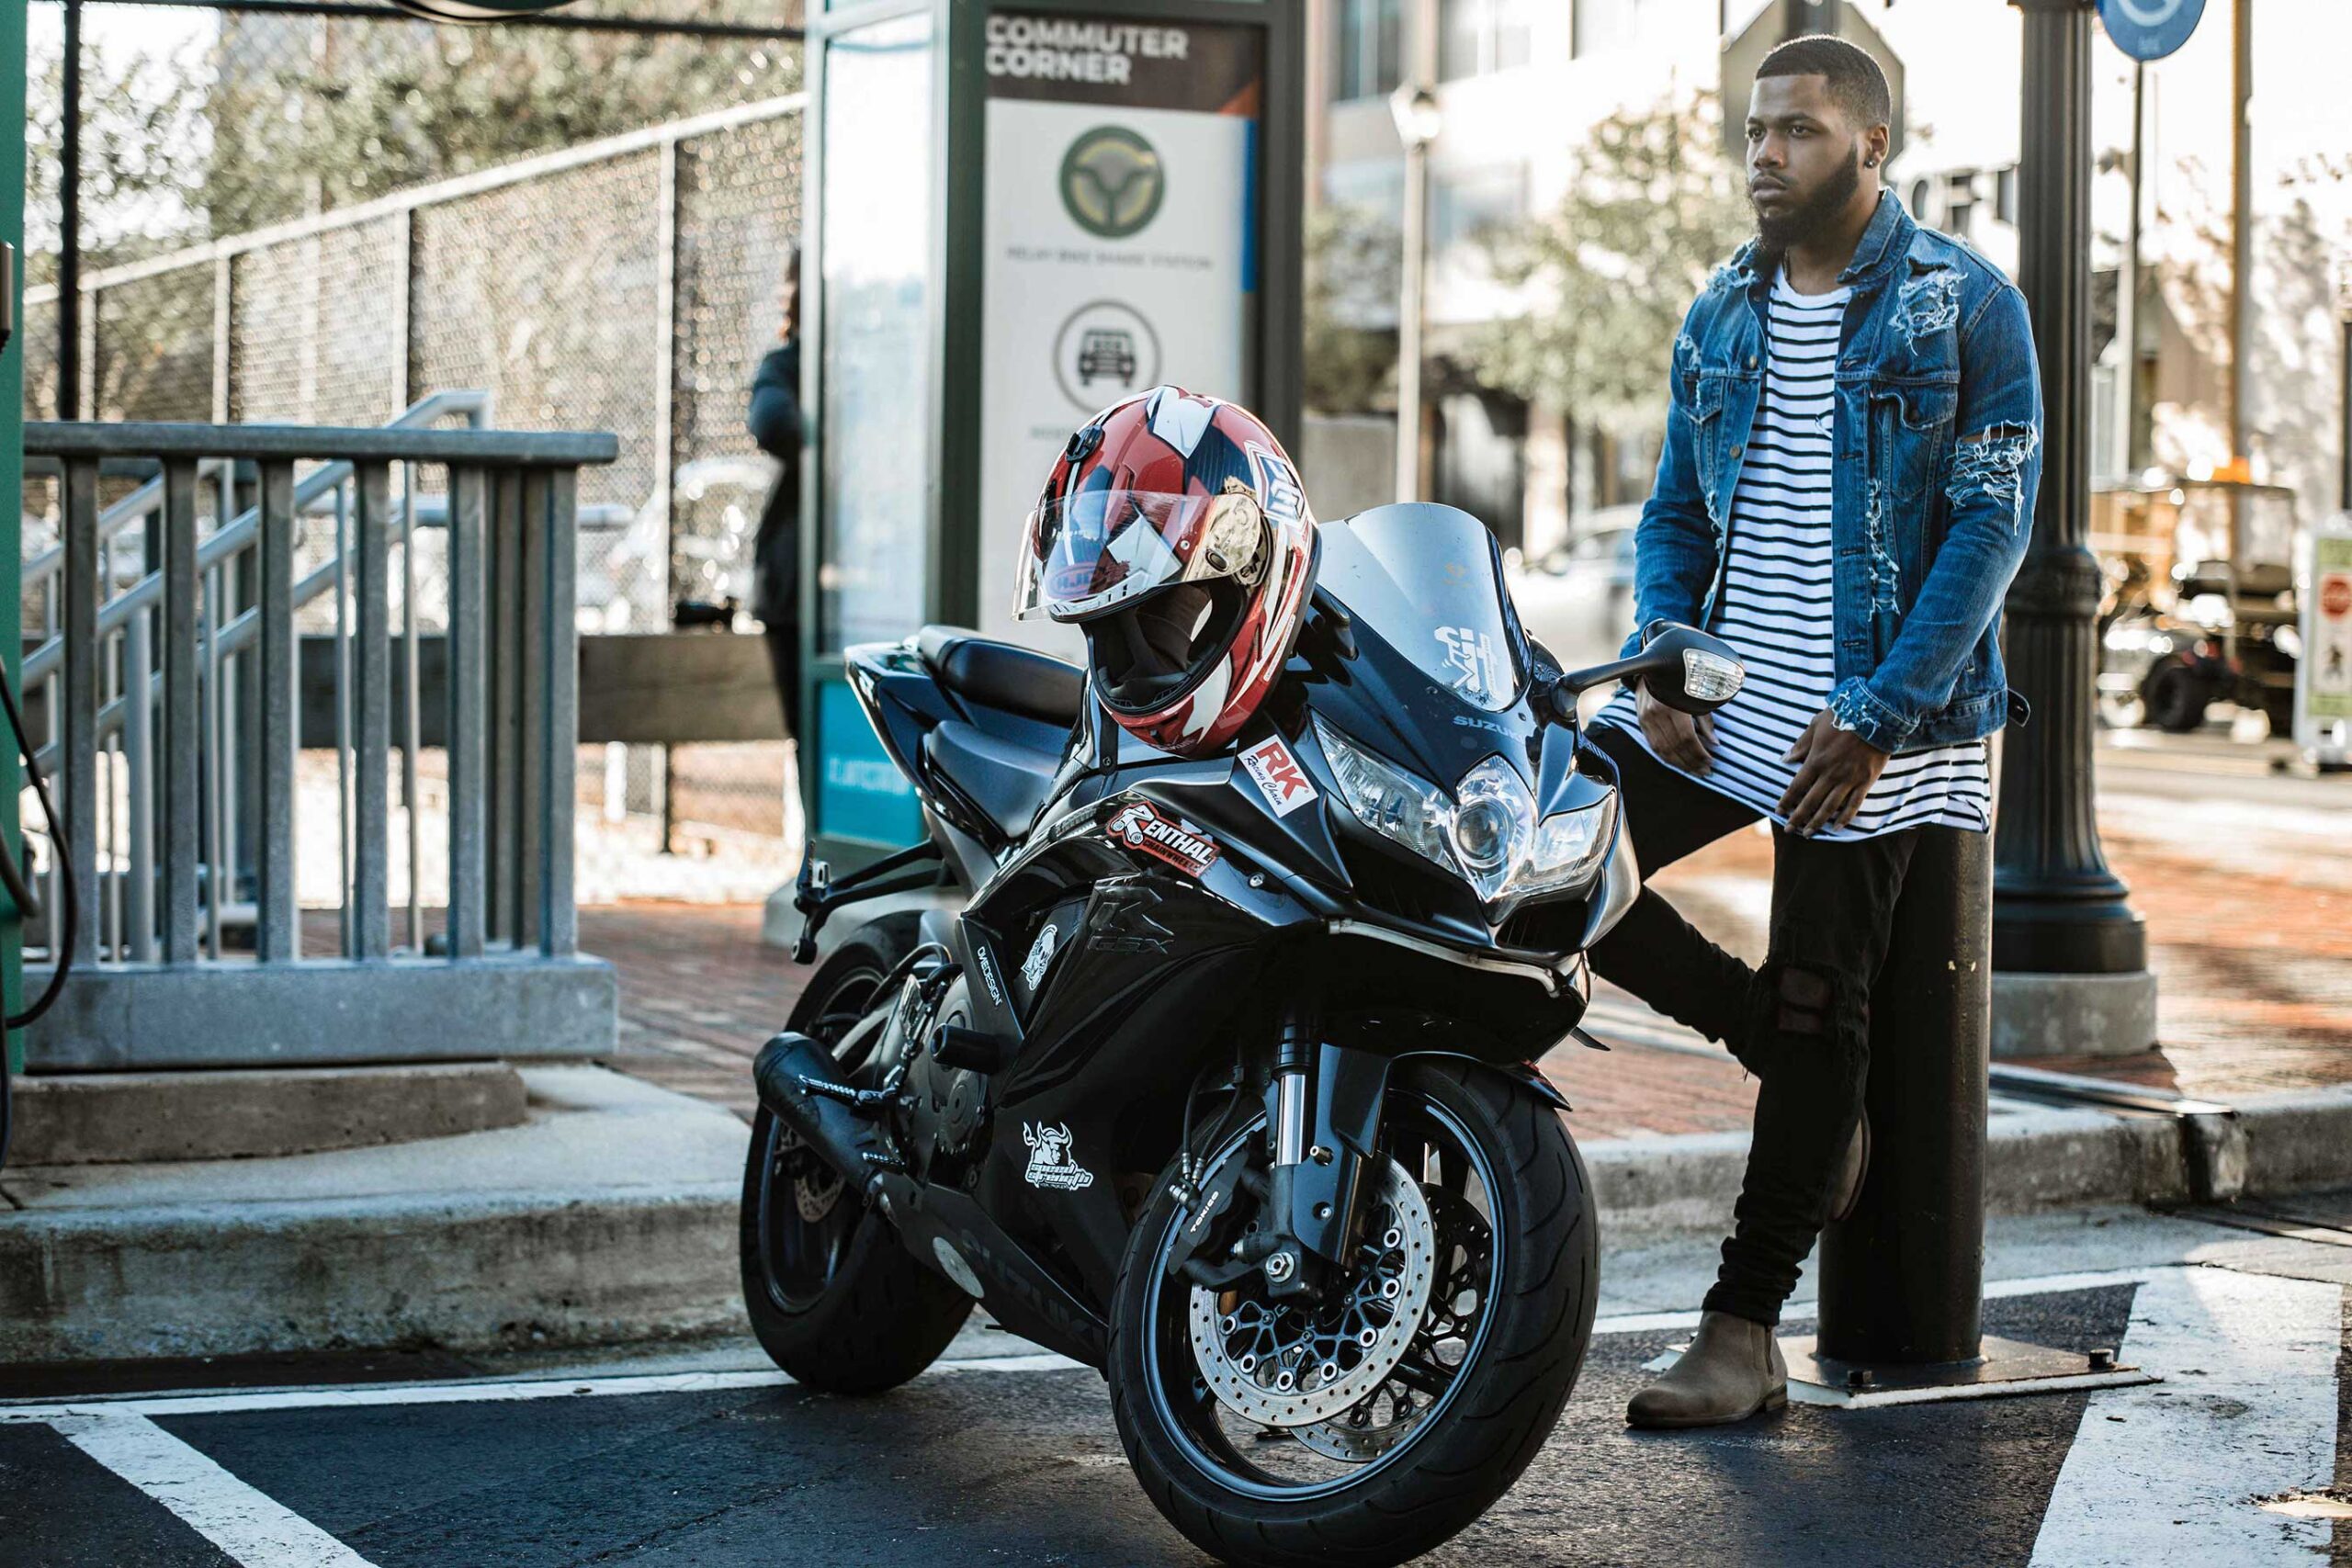 Editorial photo of a young African American man standing next to a motorcycle